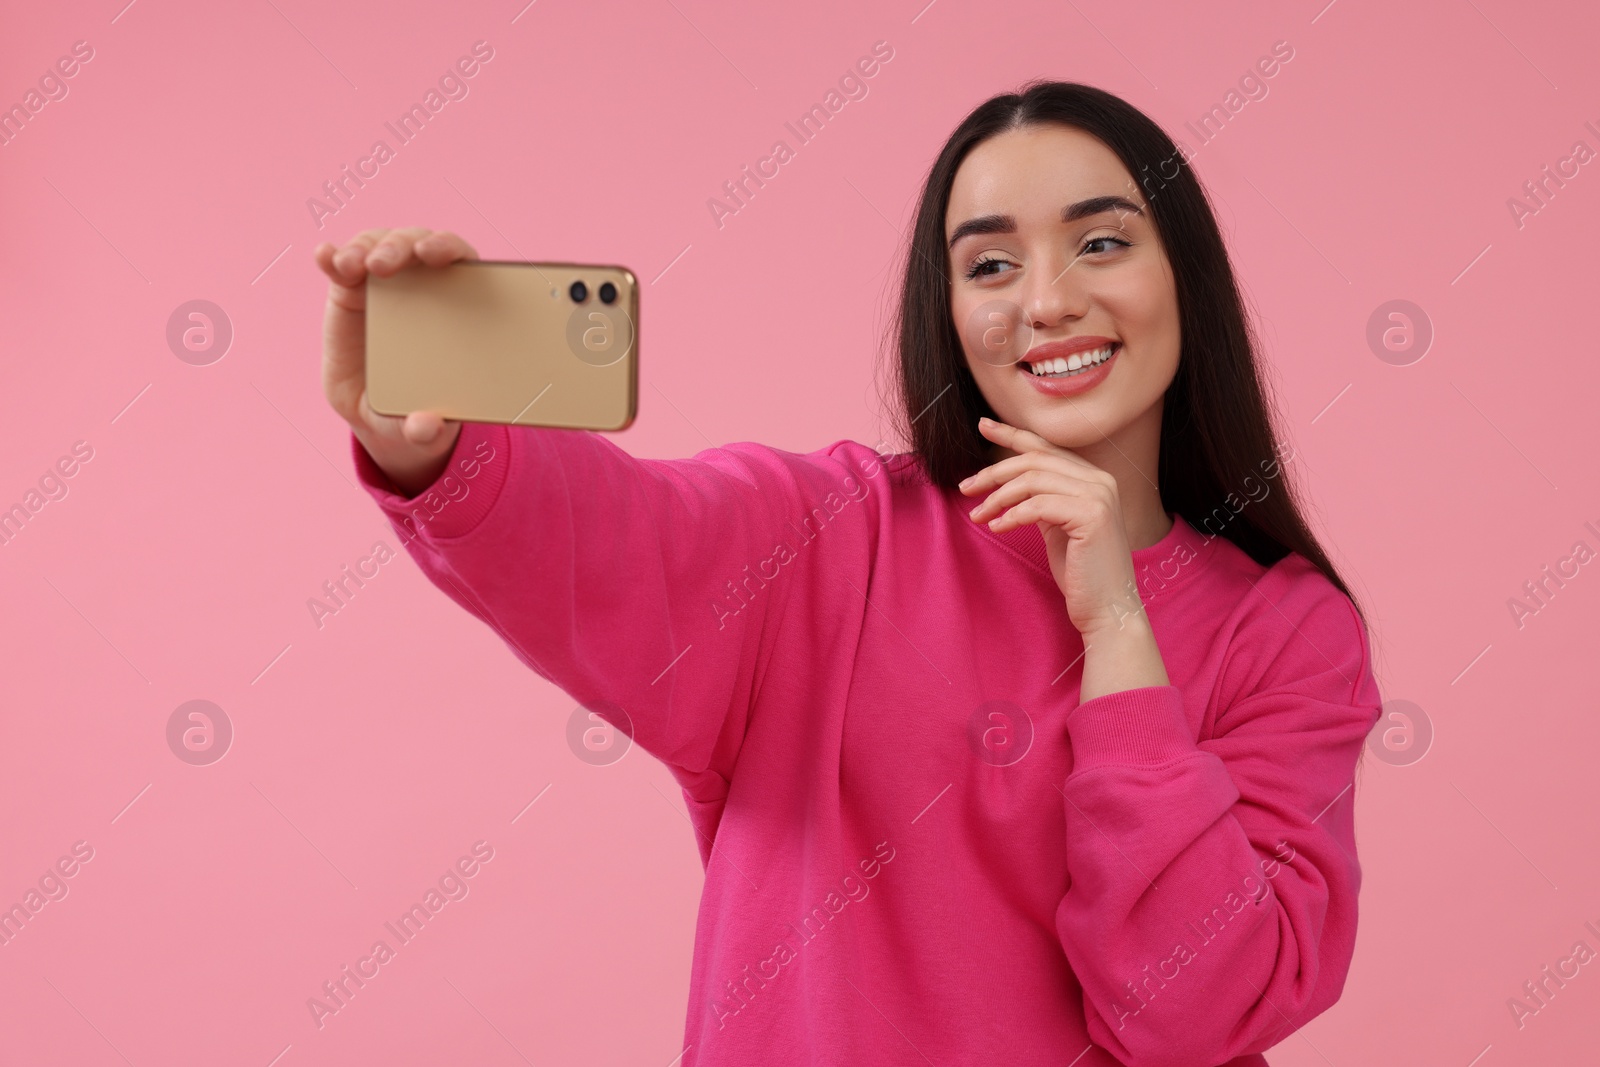 Photo of Smiling young woman taking selfie with smartphone on pink background, space for text